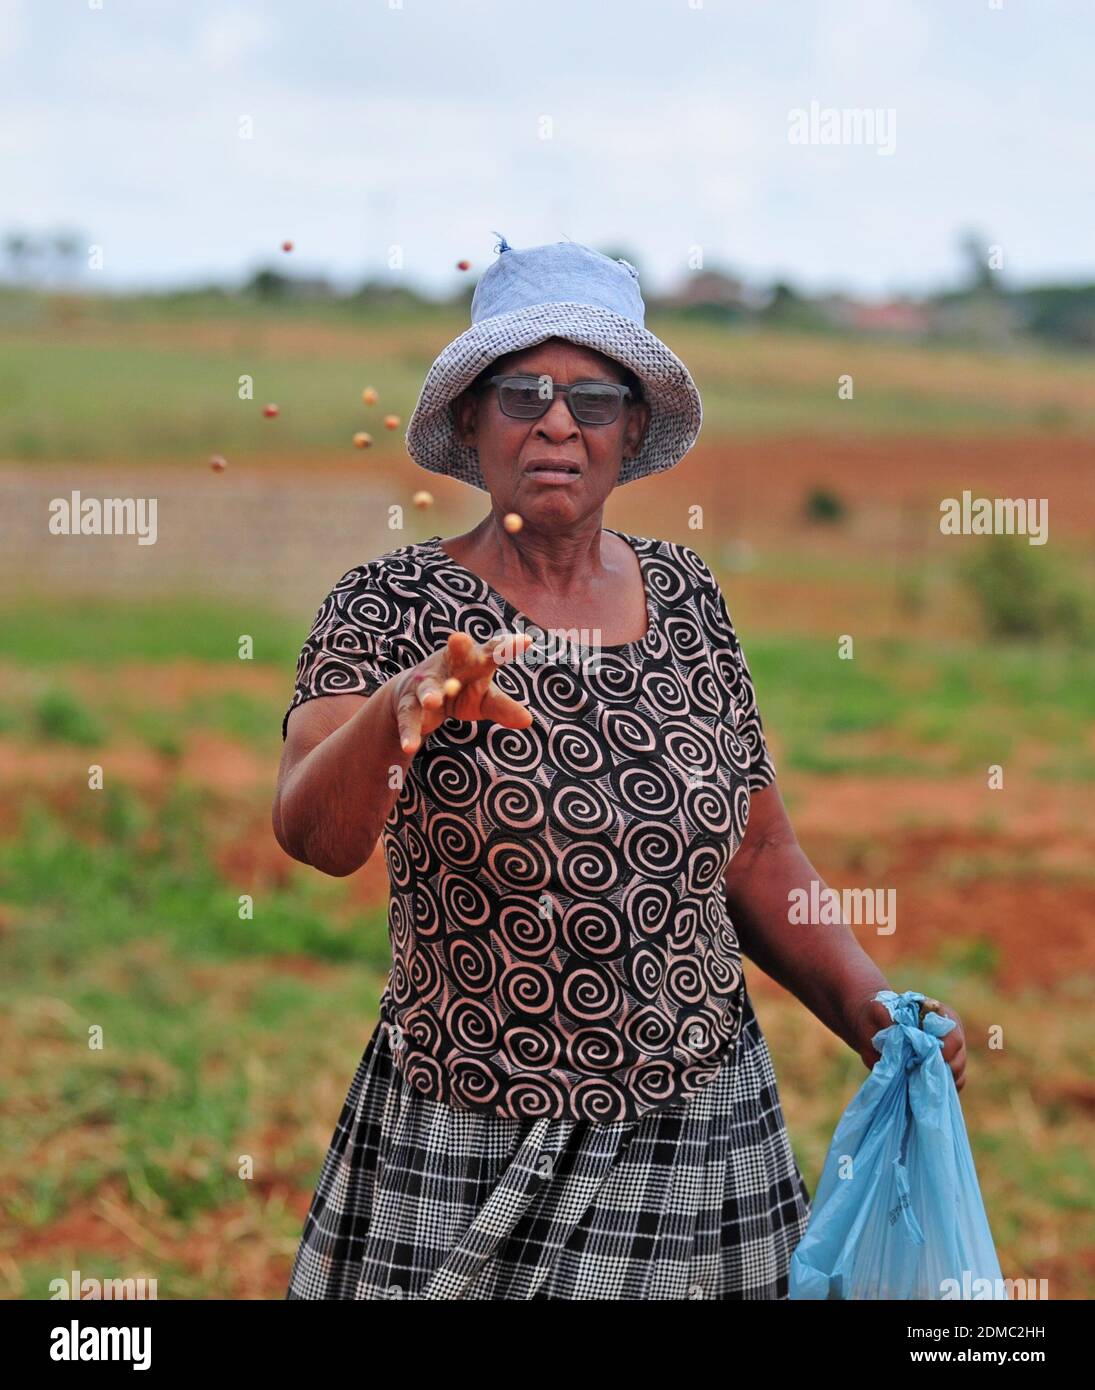 Subsistence farmers in South Africa's rural areas like Limpopo work the land during the rainy season to feed their families. Stock Photo